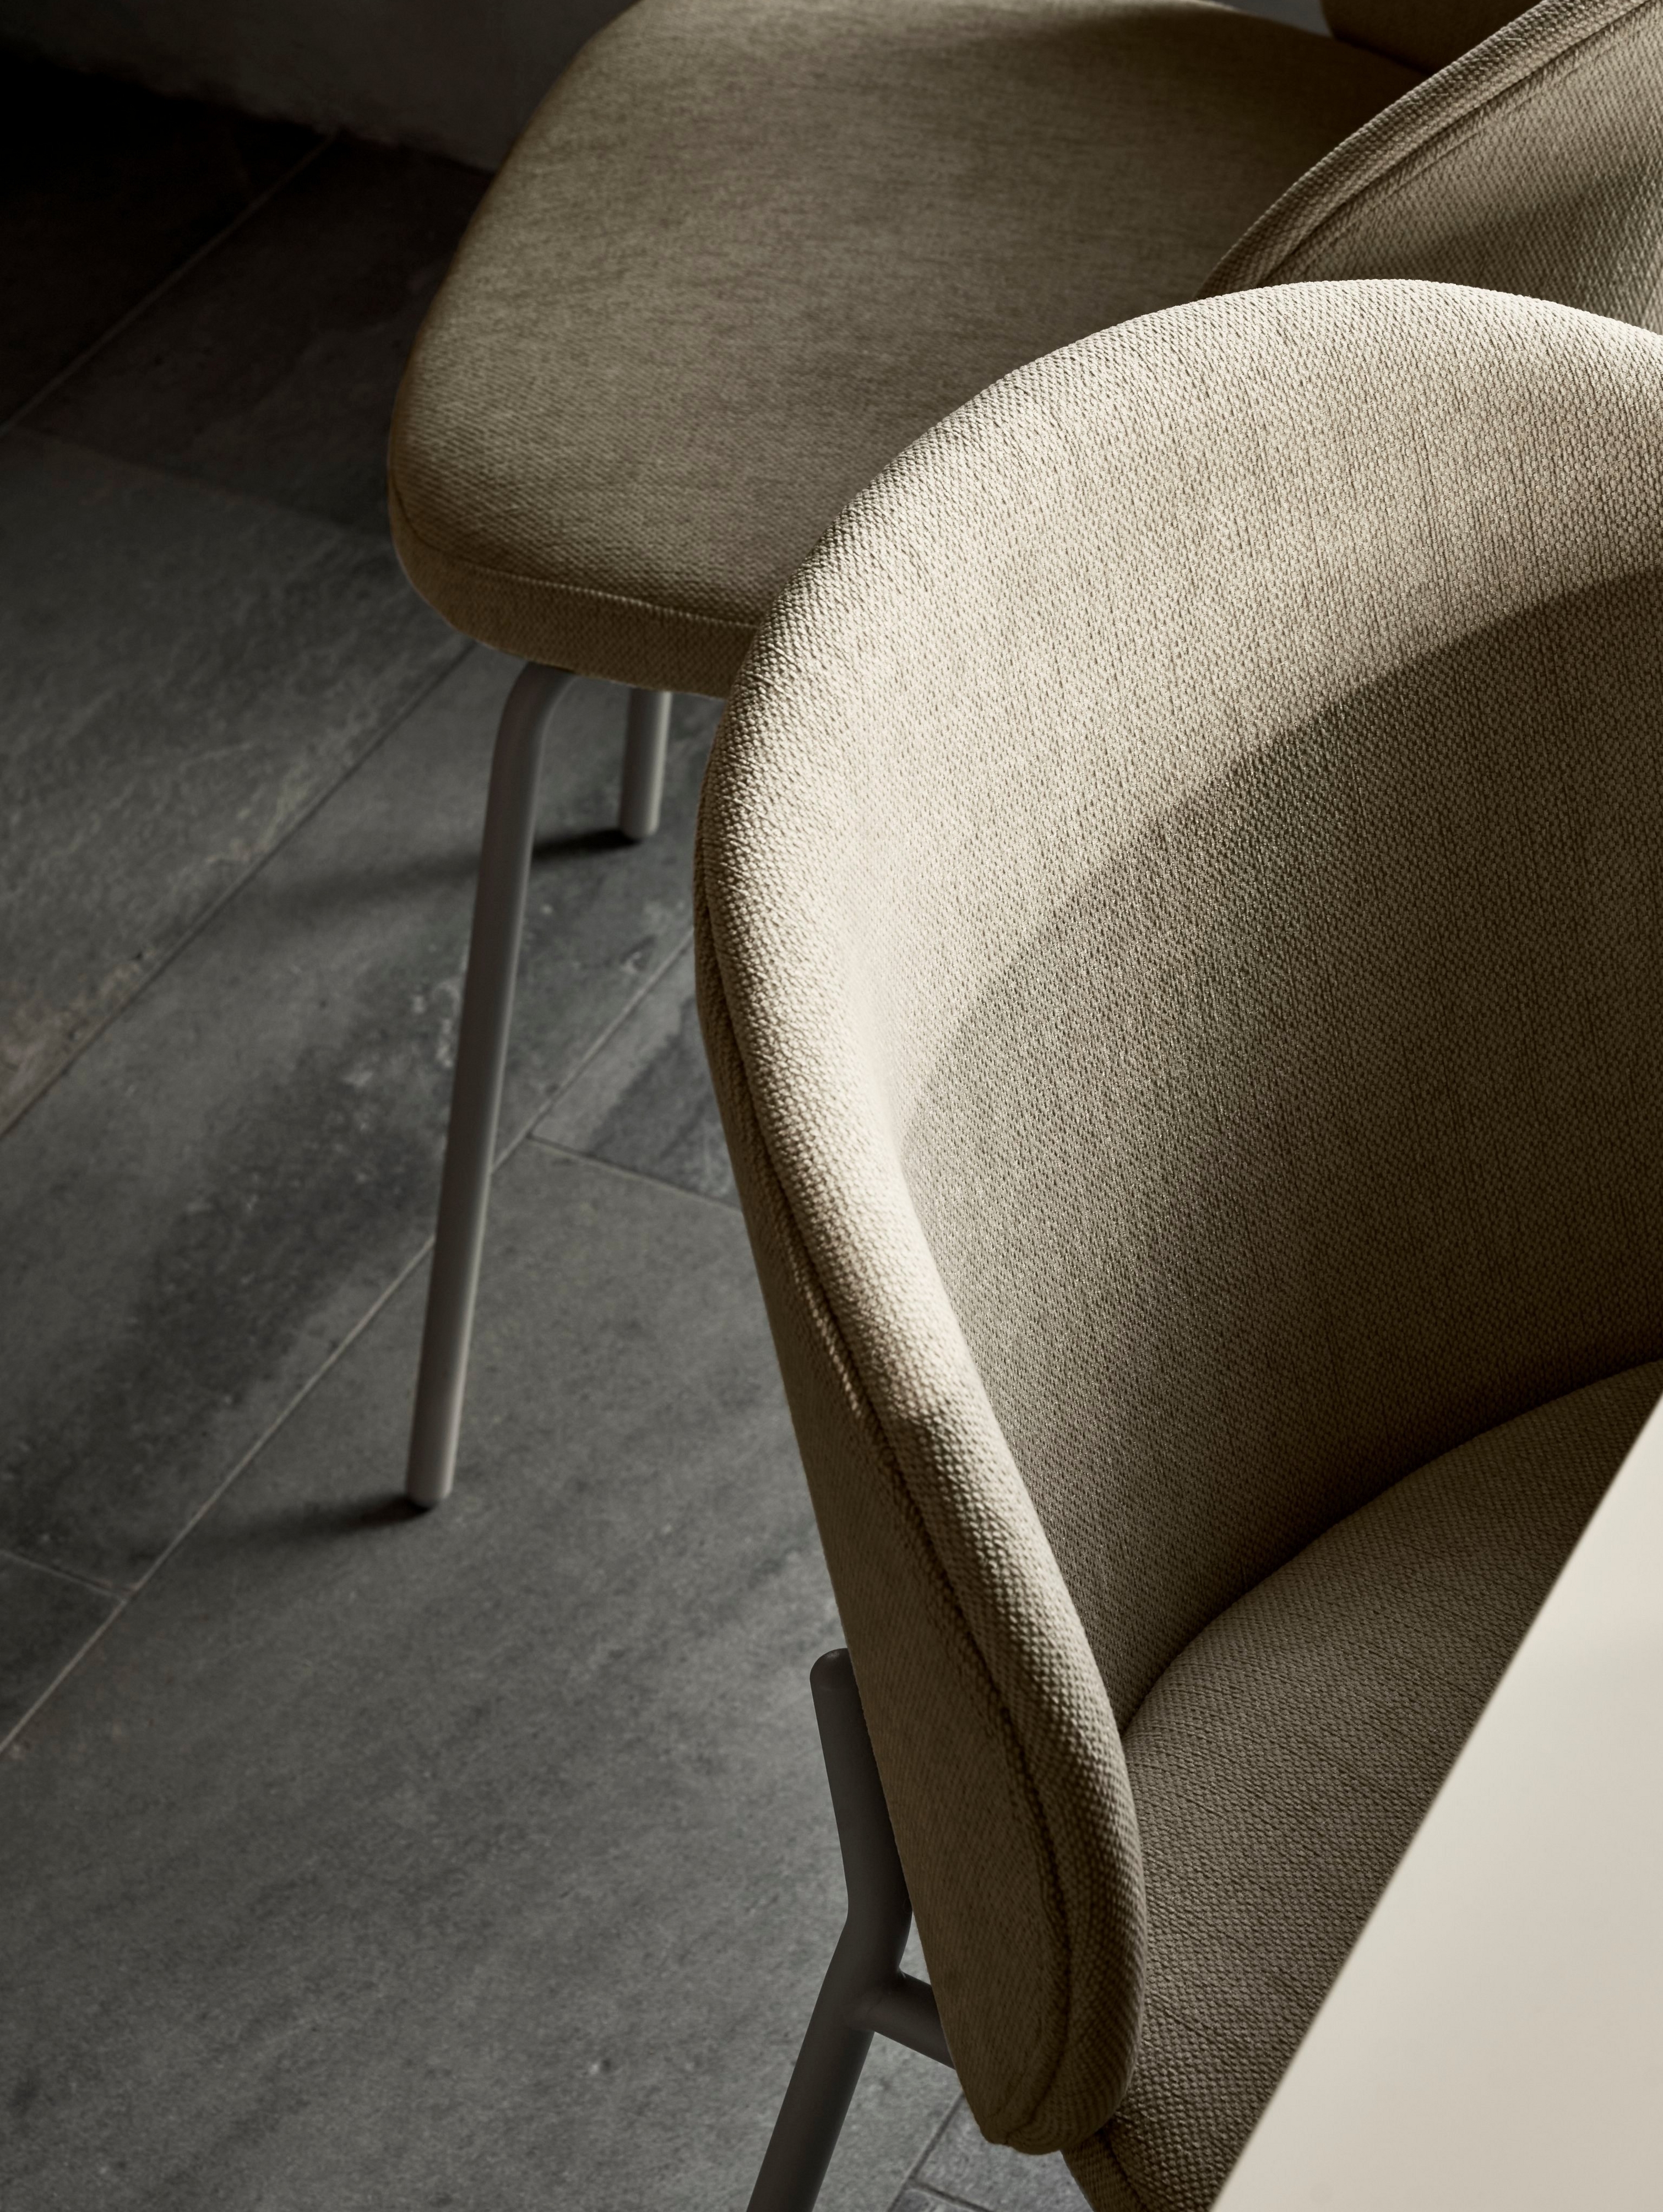 A close-up look at the Princeton dining chair in green Bresso fabric.